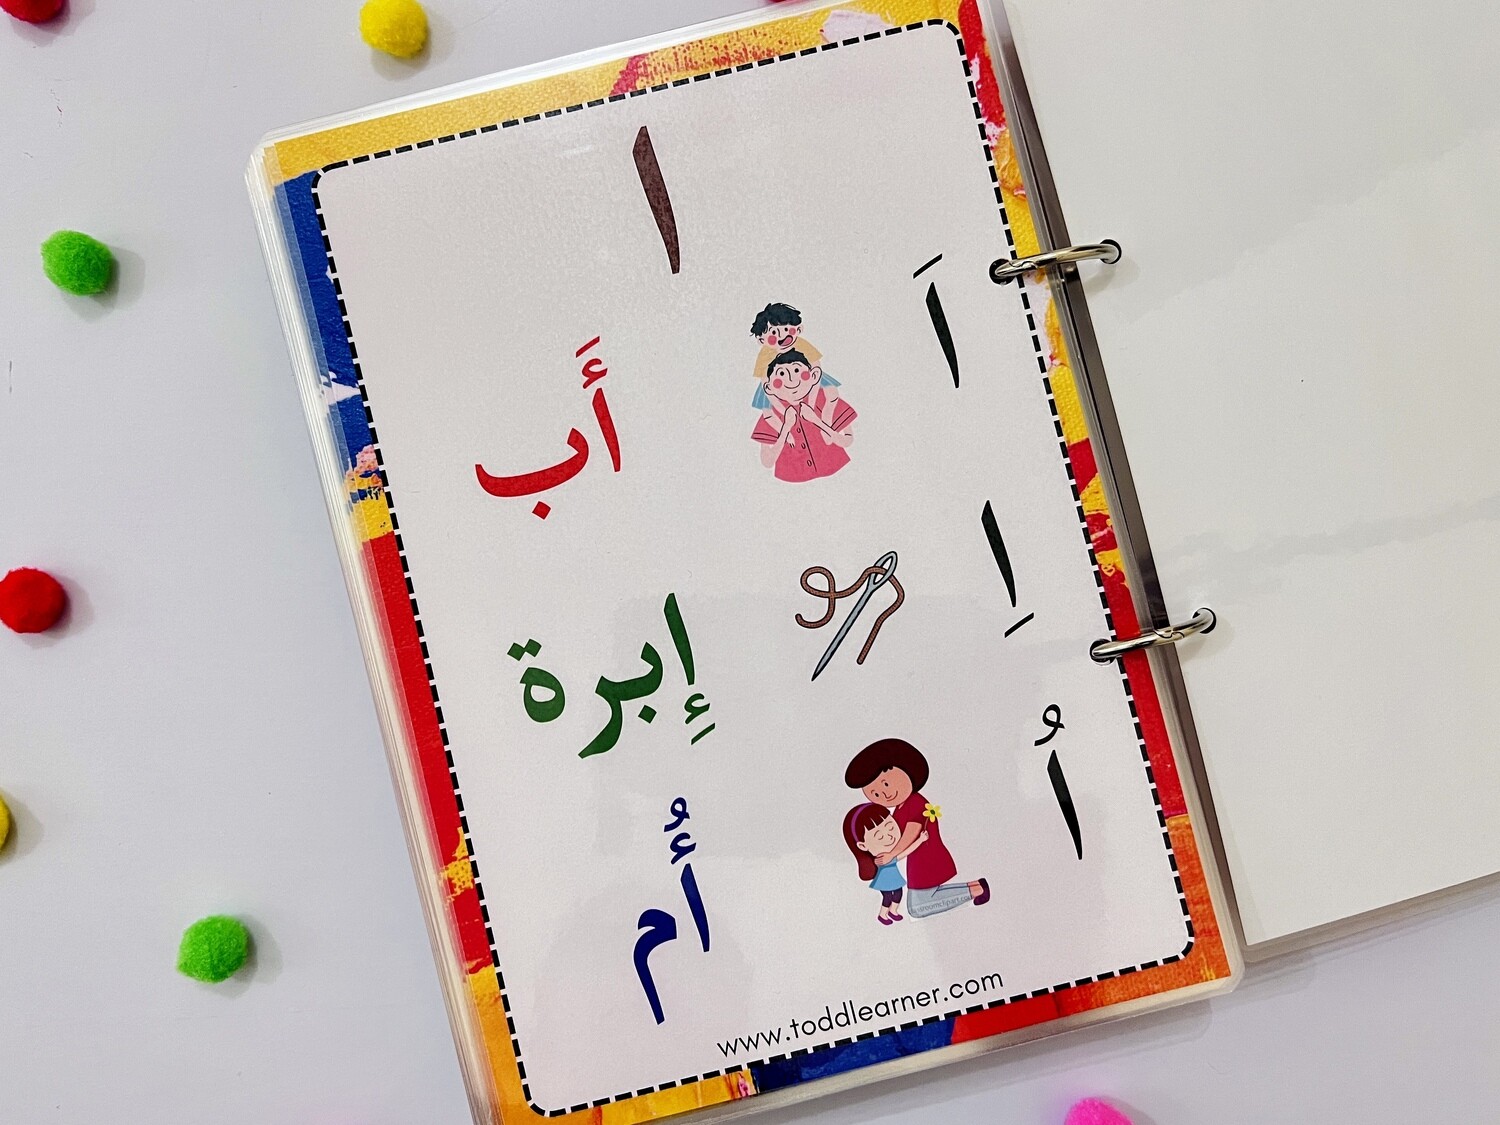 Arabic Reading Cards for Kids with Harakat. Includes Fatha, Kathara and Dhamma words.